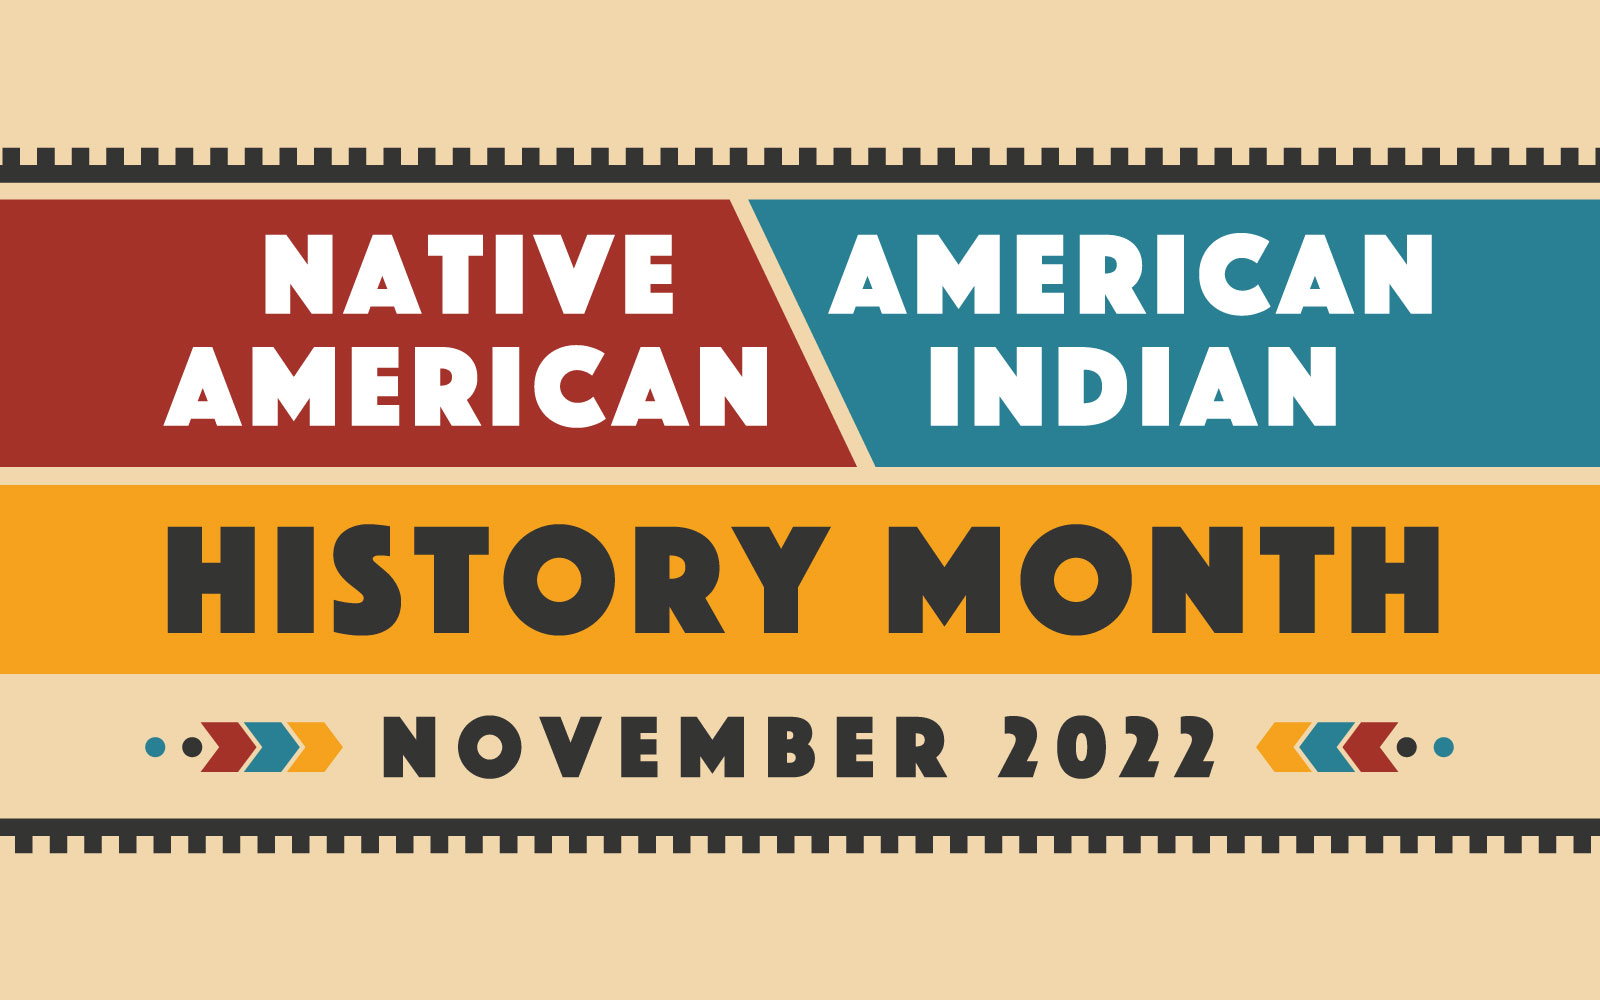 Native American Heritage Month 2020